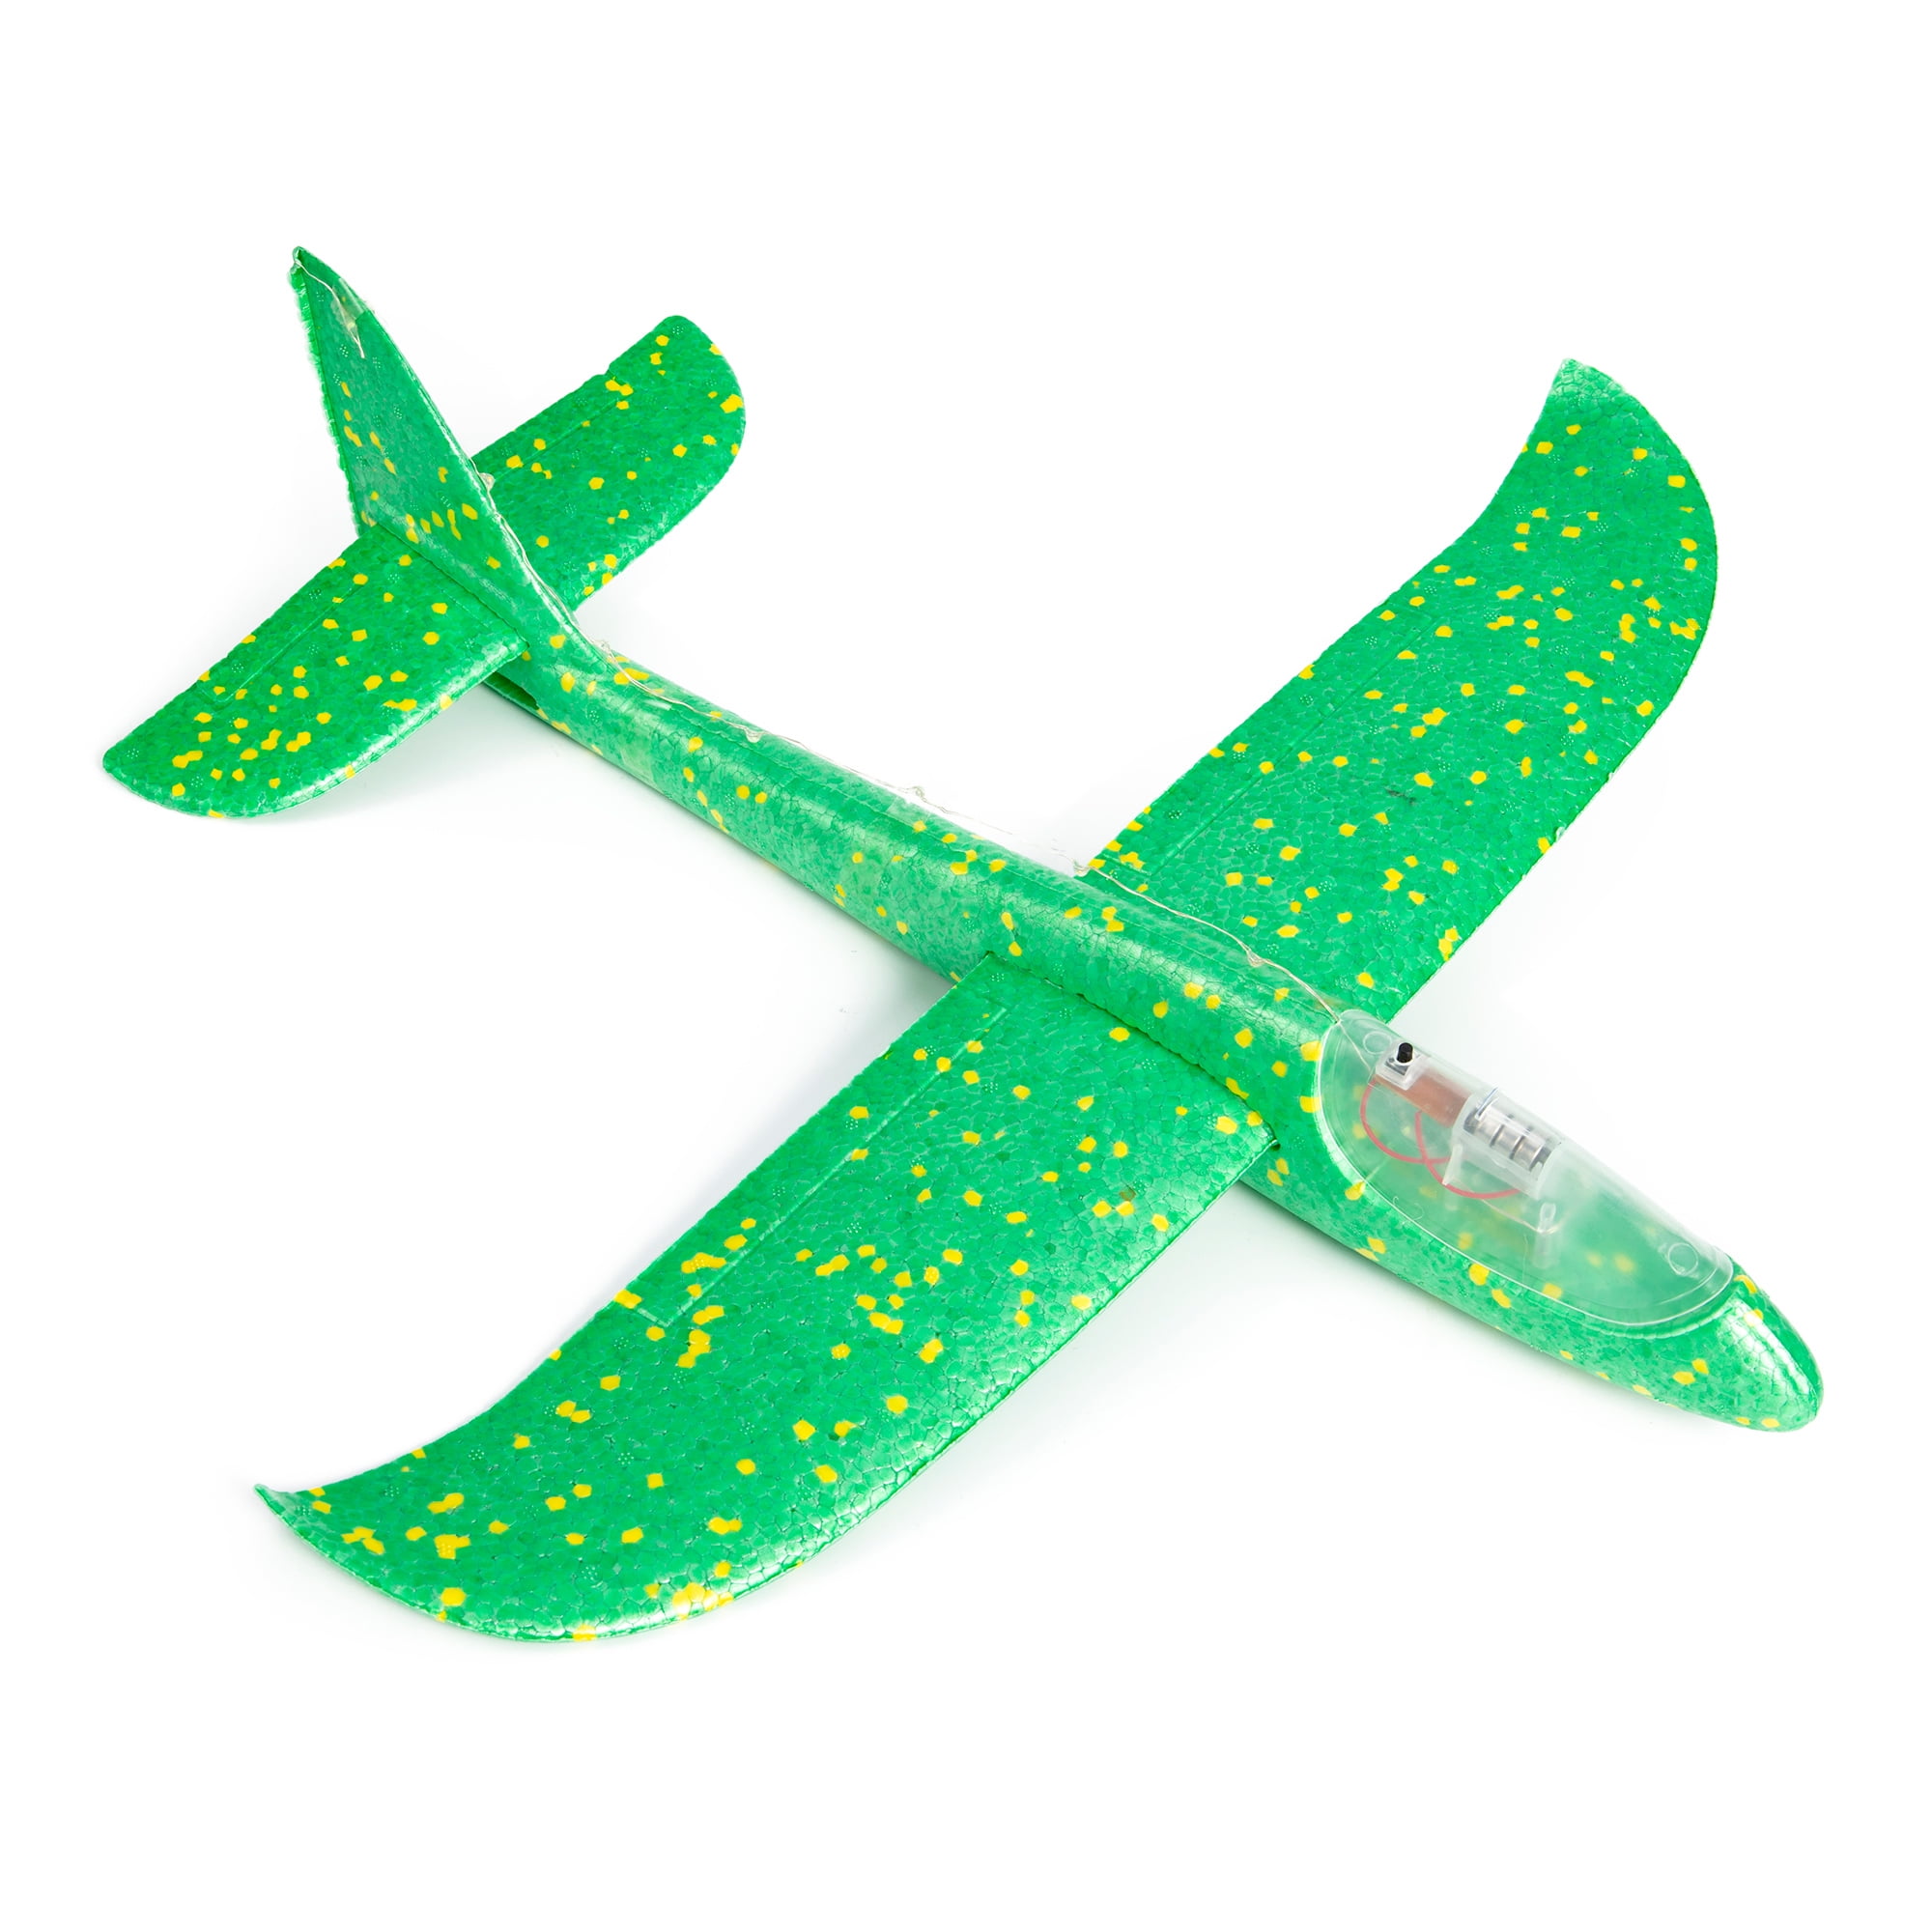 Details about   Foam Throwing Glider Toy with LED Light Outdoor Children DIY Airplane Model Toy 